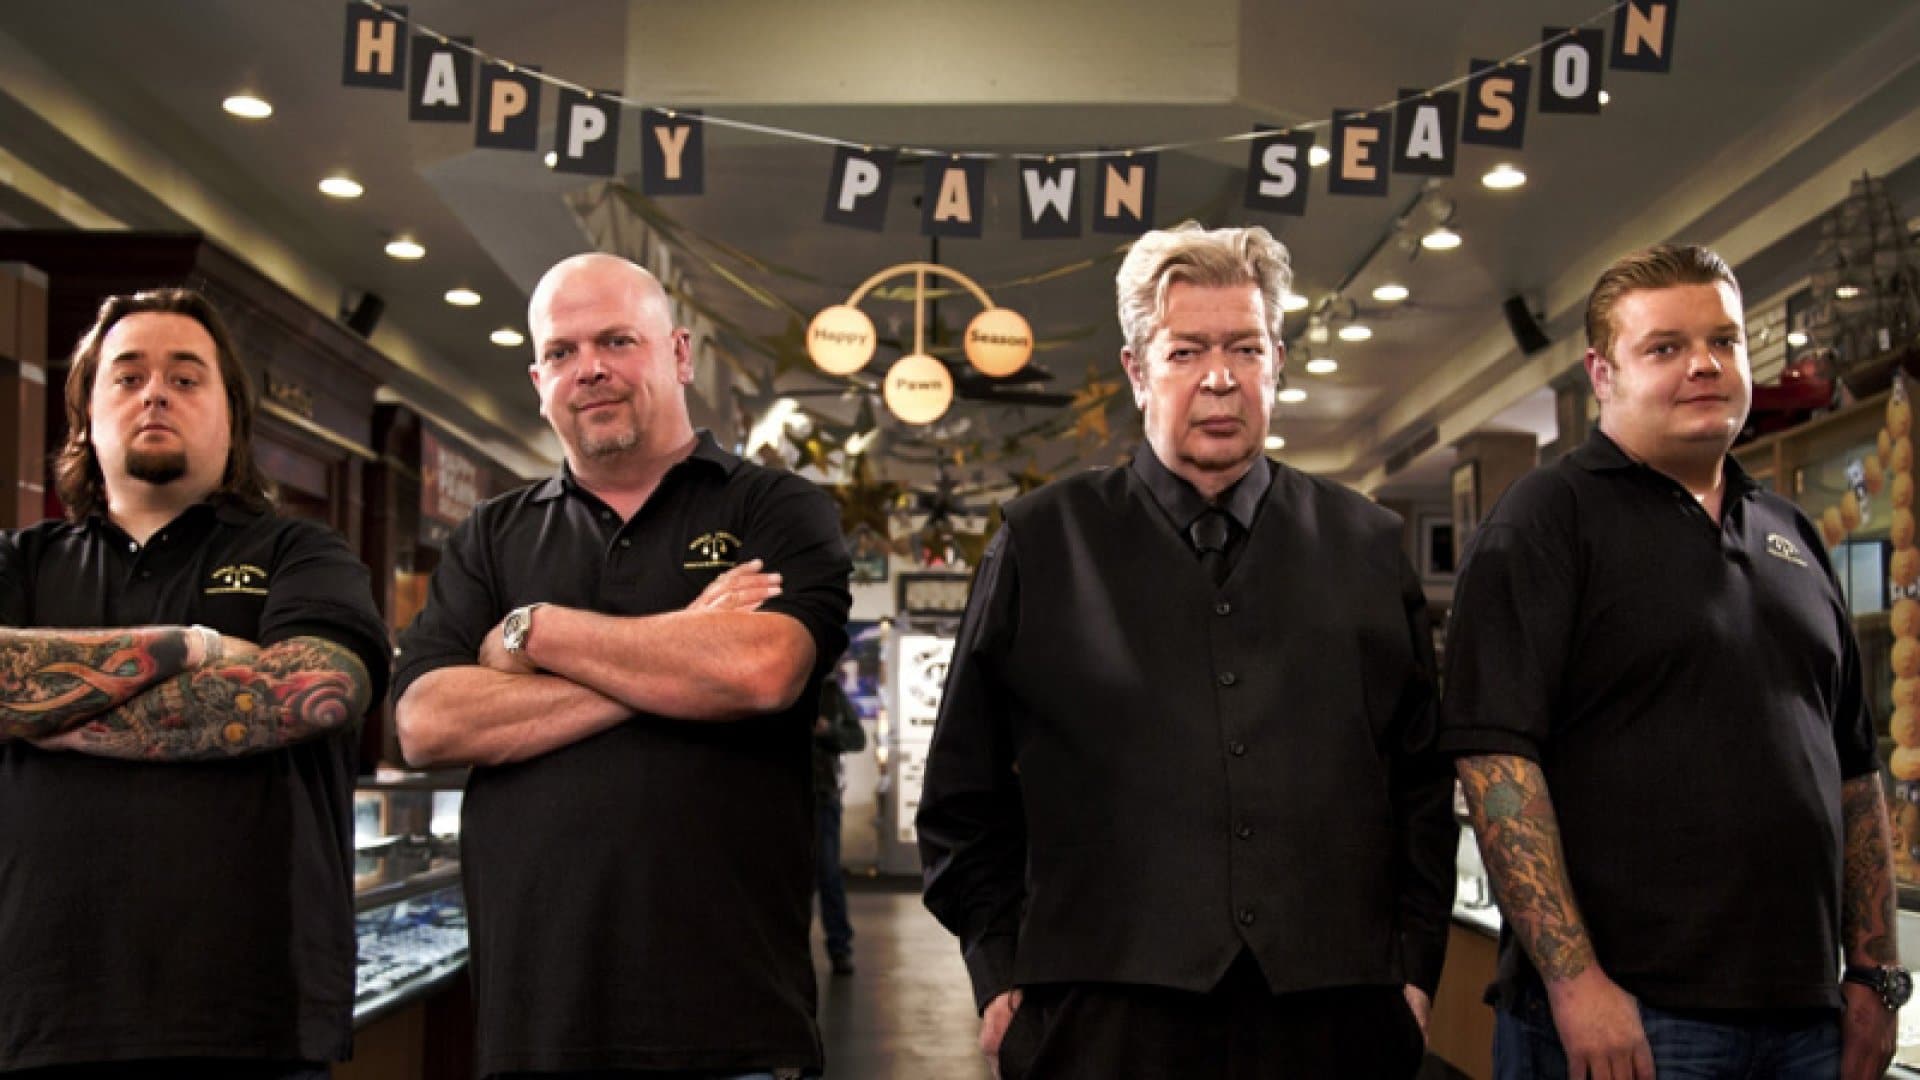 Who is the richest cast member on Pawn Stars?